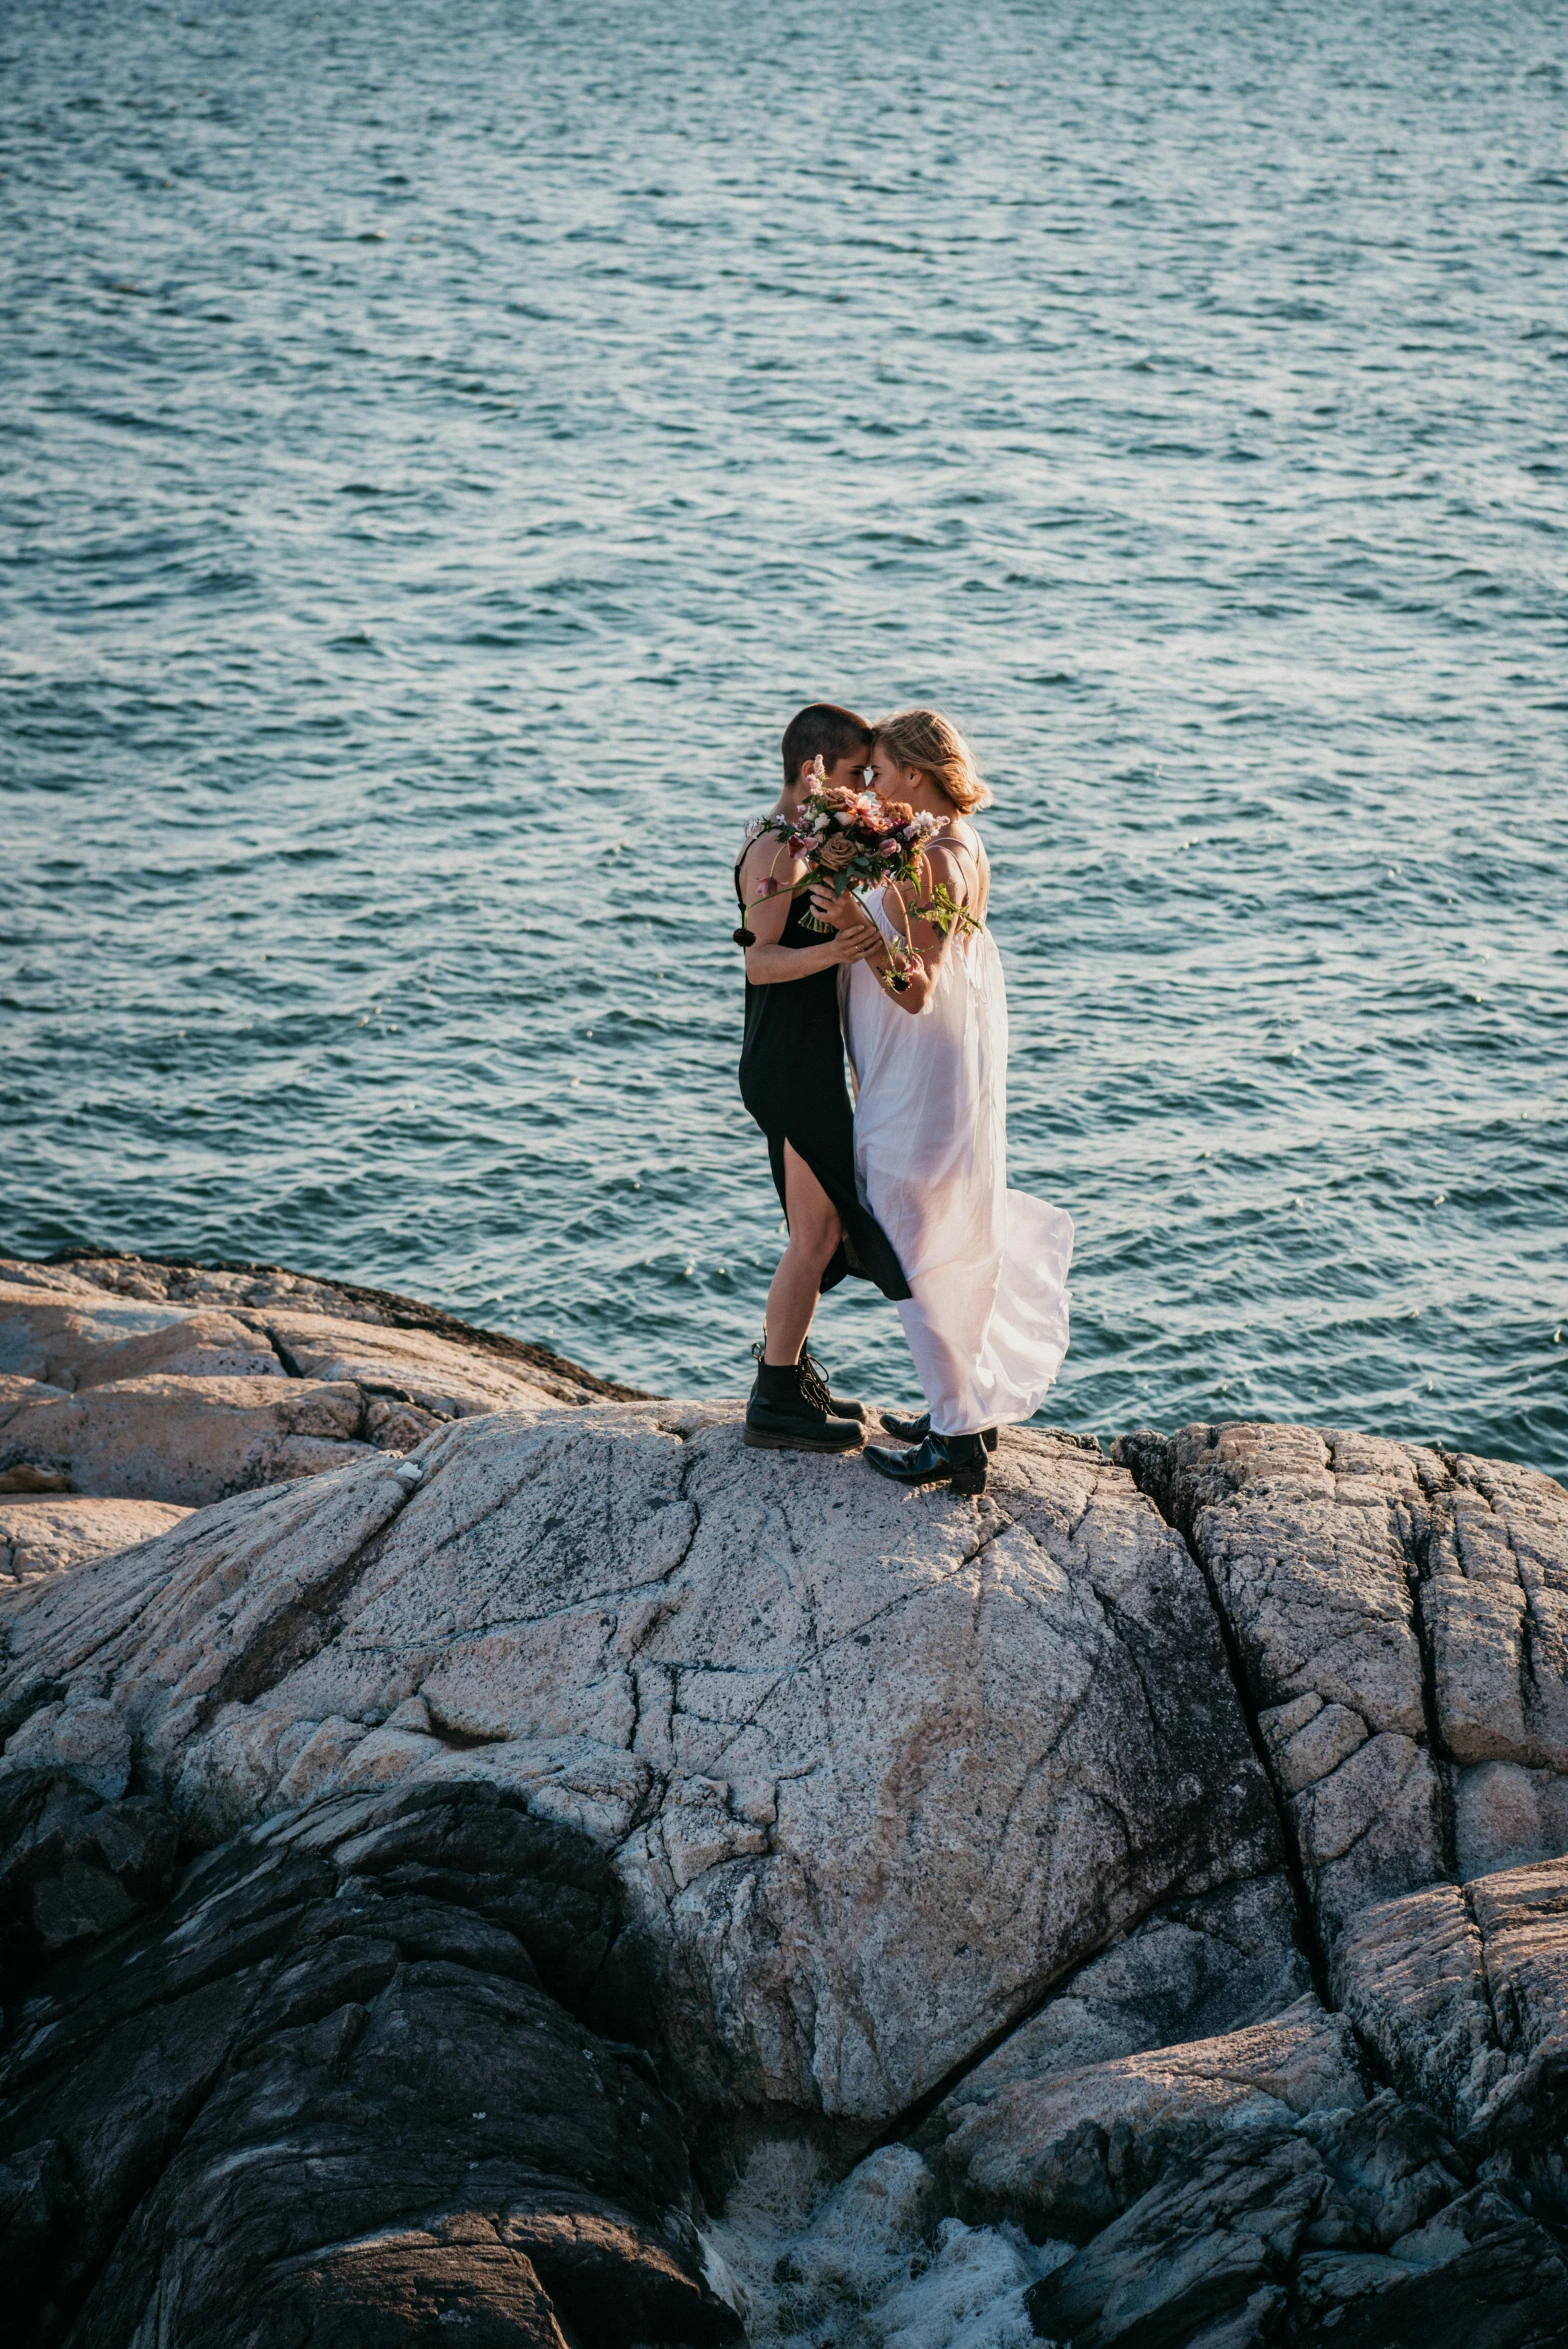 a bride and groom standing on a rock in front of the ocean, unsplash, romanticism, lesbian kiss, manly, floating bouquets, multiple stories